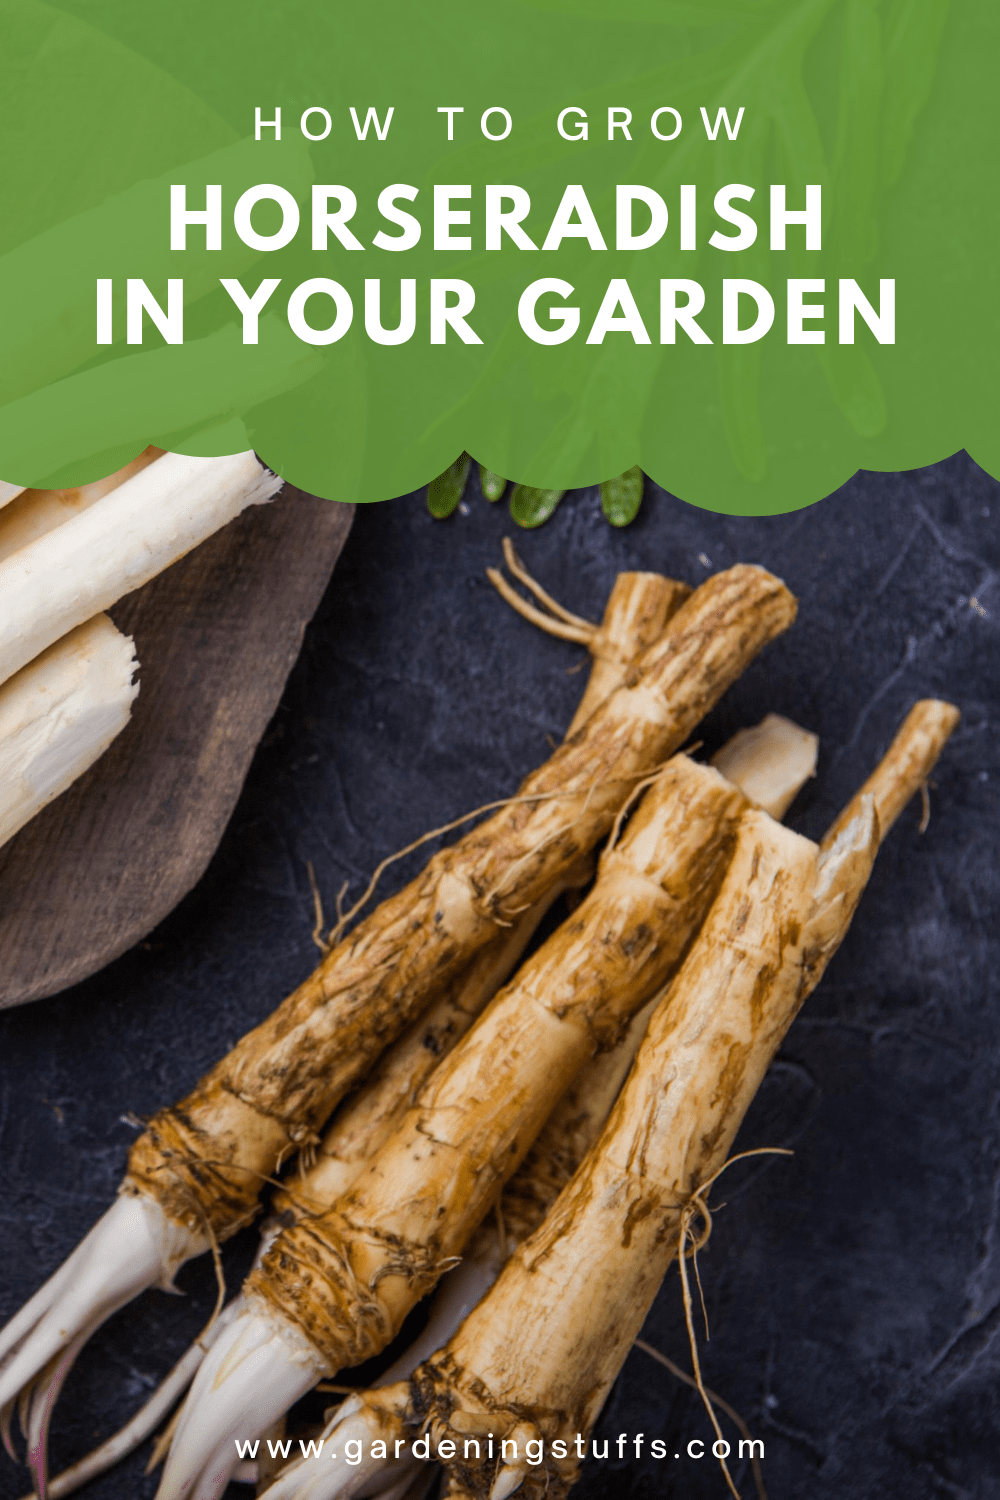 In this guide, we'll walk you through how to grow your own horseradish in your garden in 9 easy steps so you can create your own delicious Horseradish sauce.